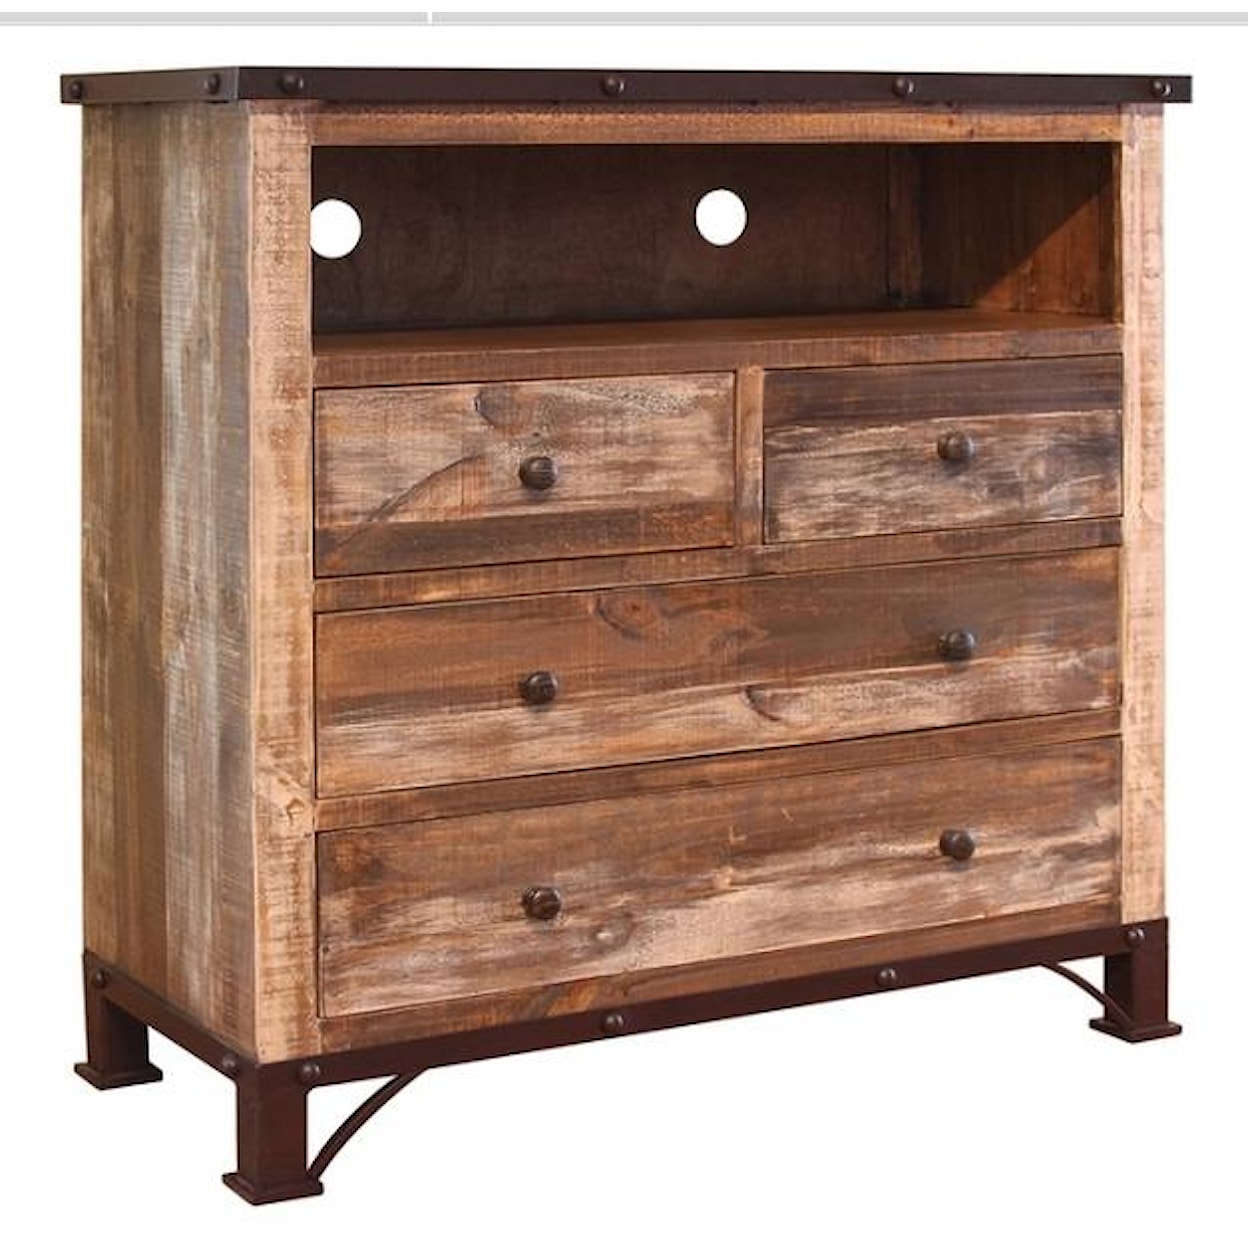 IFD 900 Antique 4 Drawer Media Chest